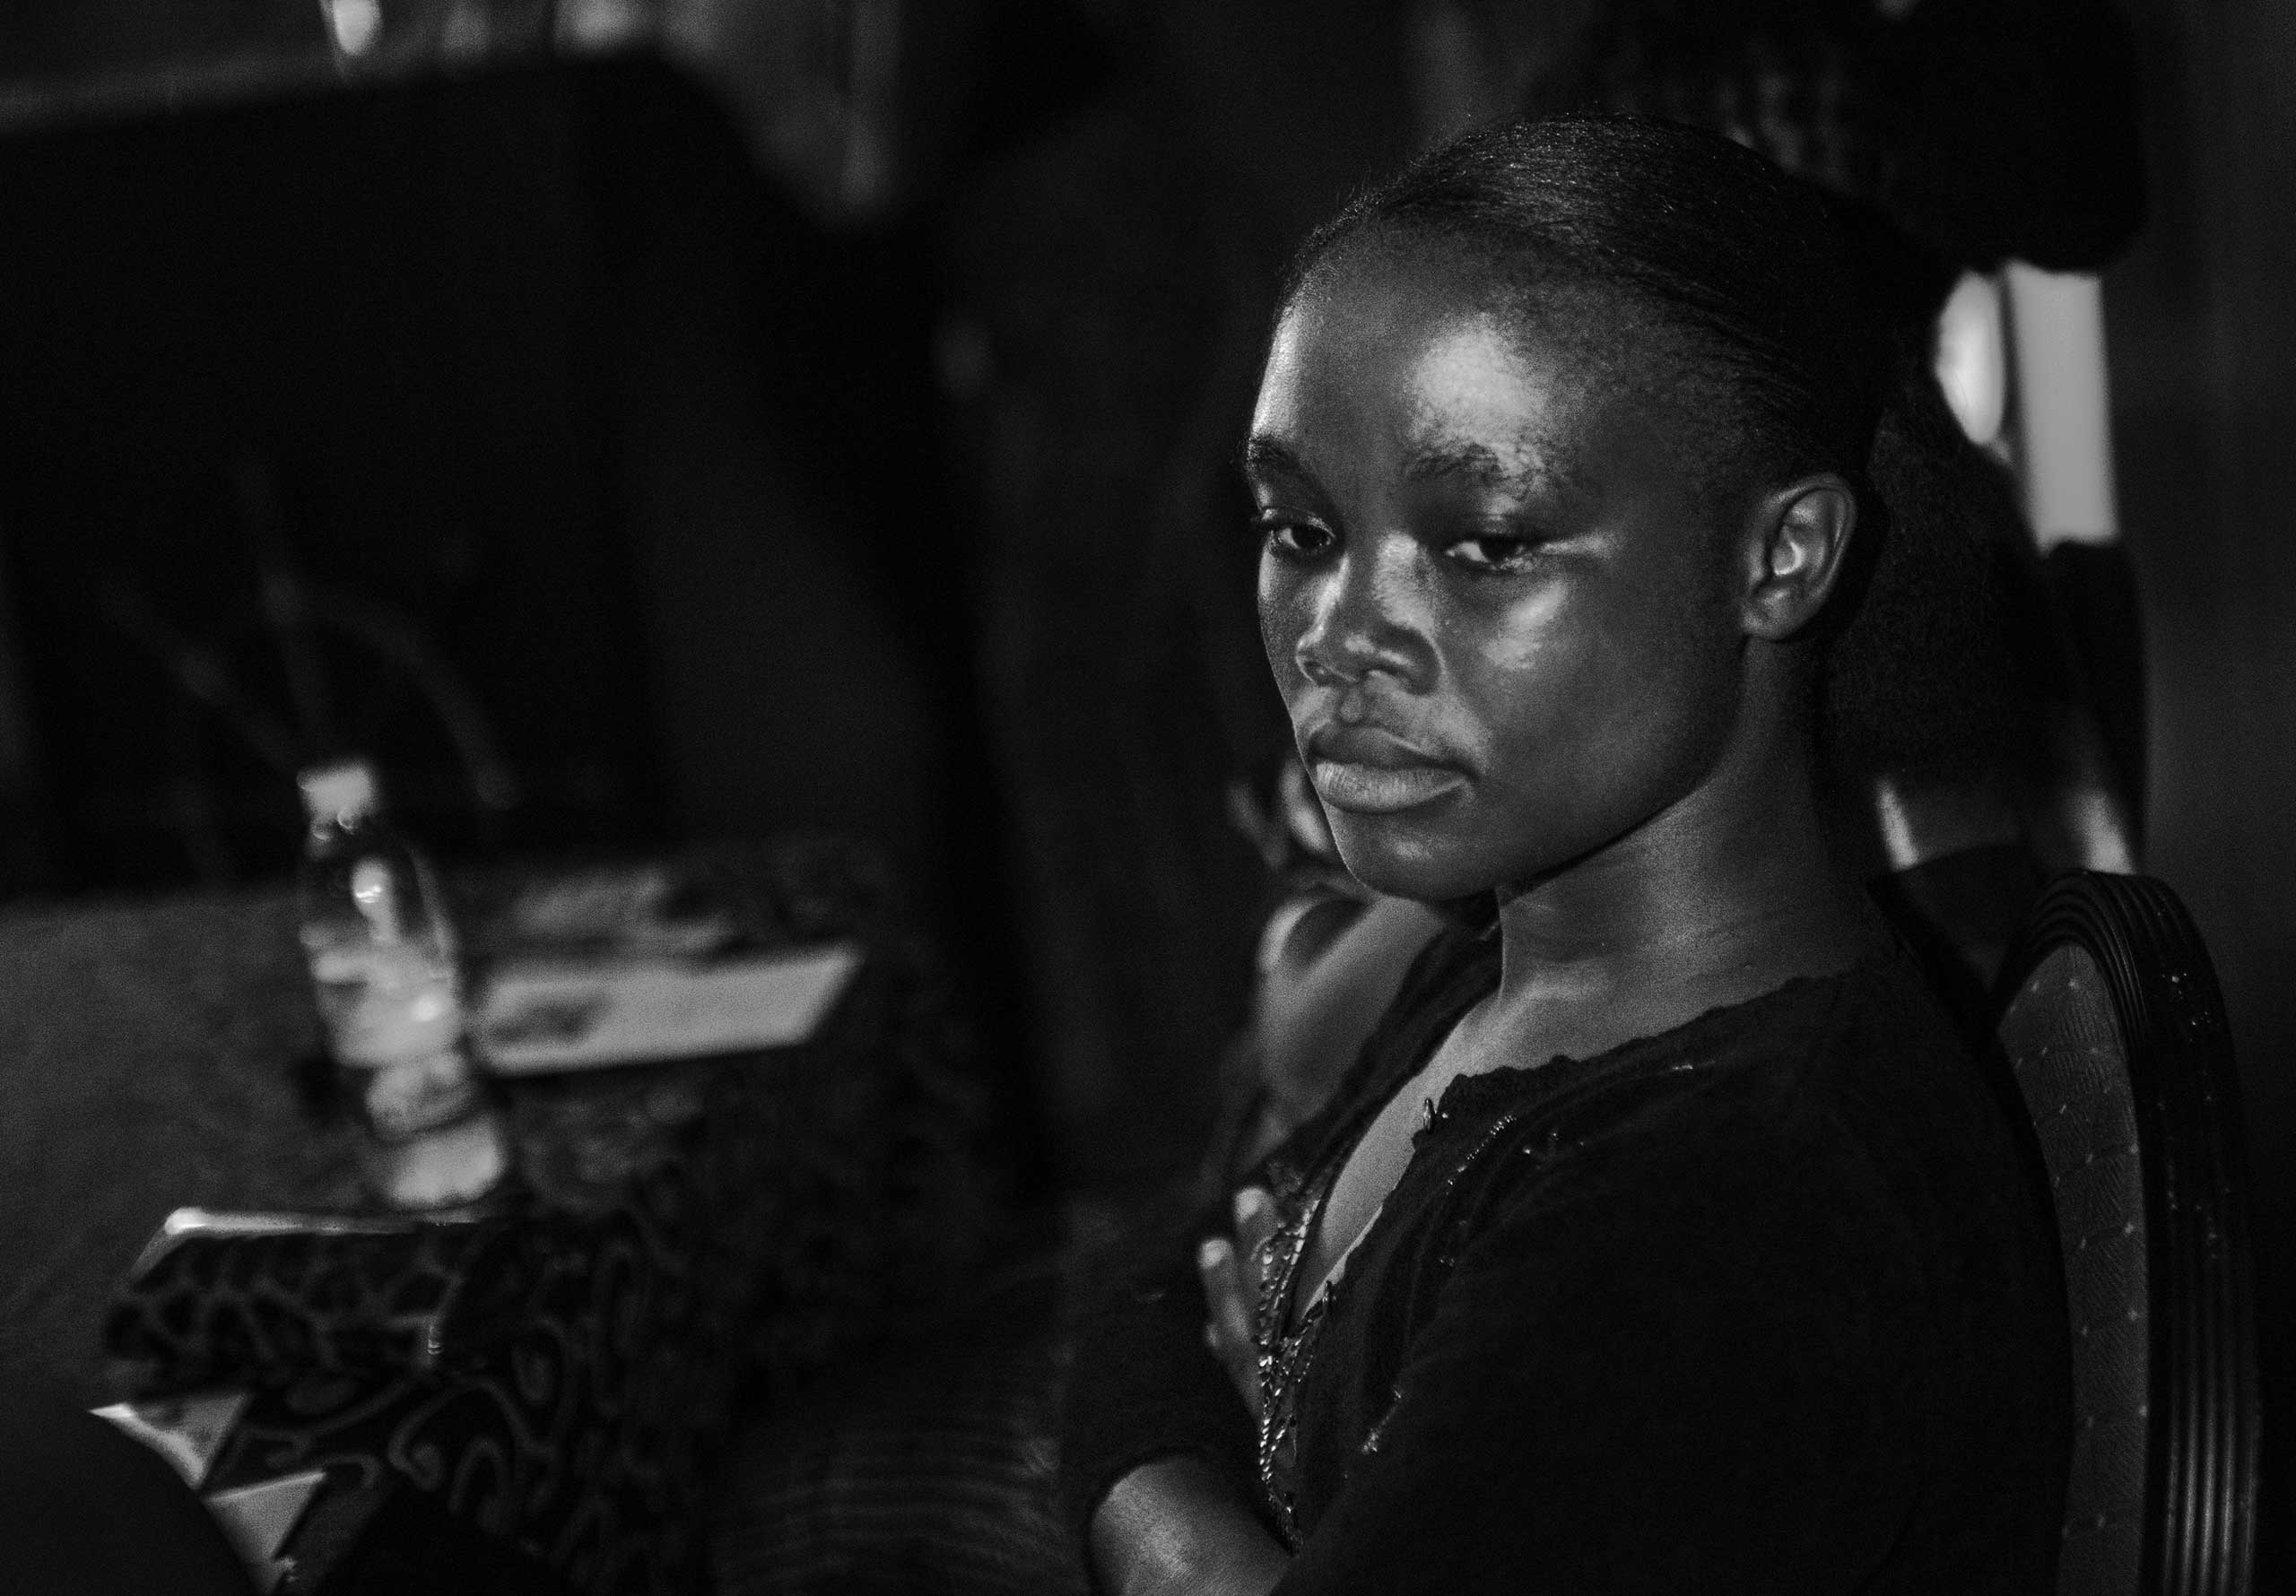 Decontee Davis, an Ebola survivor, spends a moment alone pondering during a music video launch party to raise awareness on Ebola, Nov. 12, 2014 in Monrovia, Liberia.